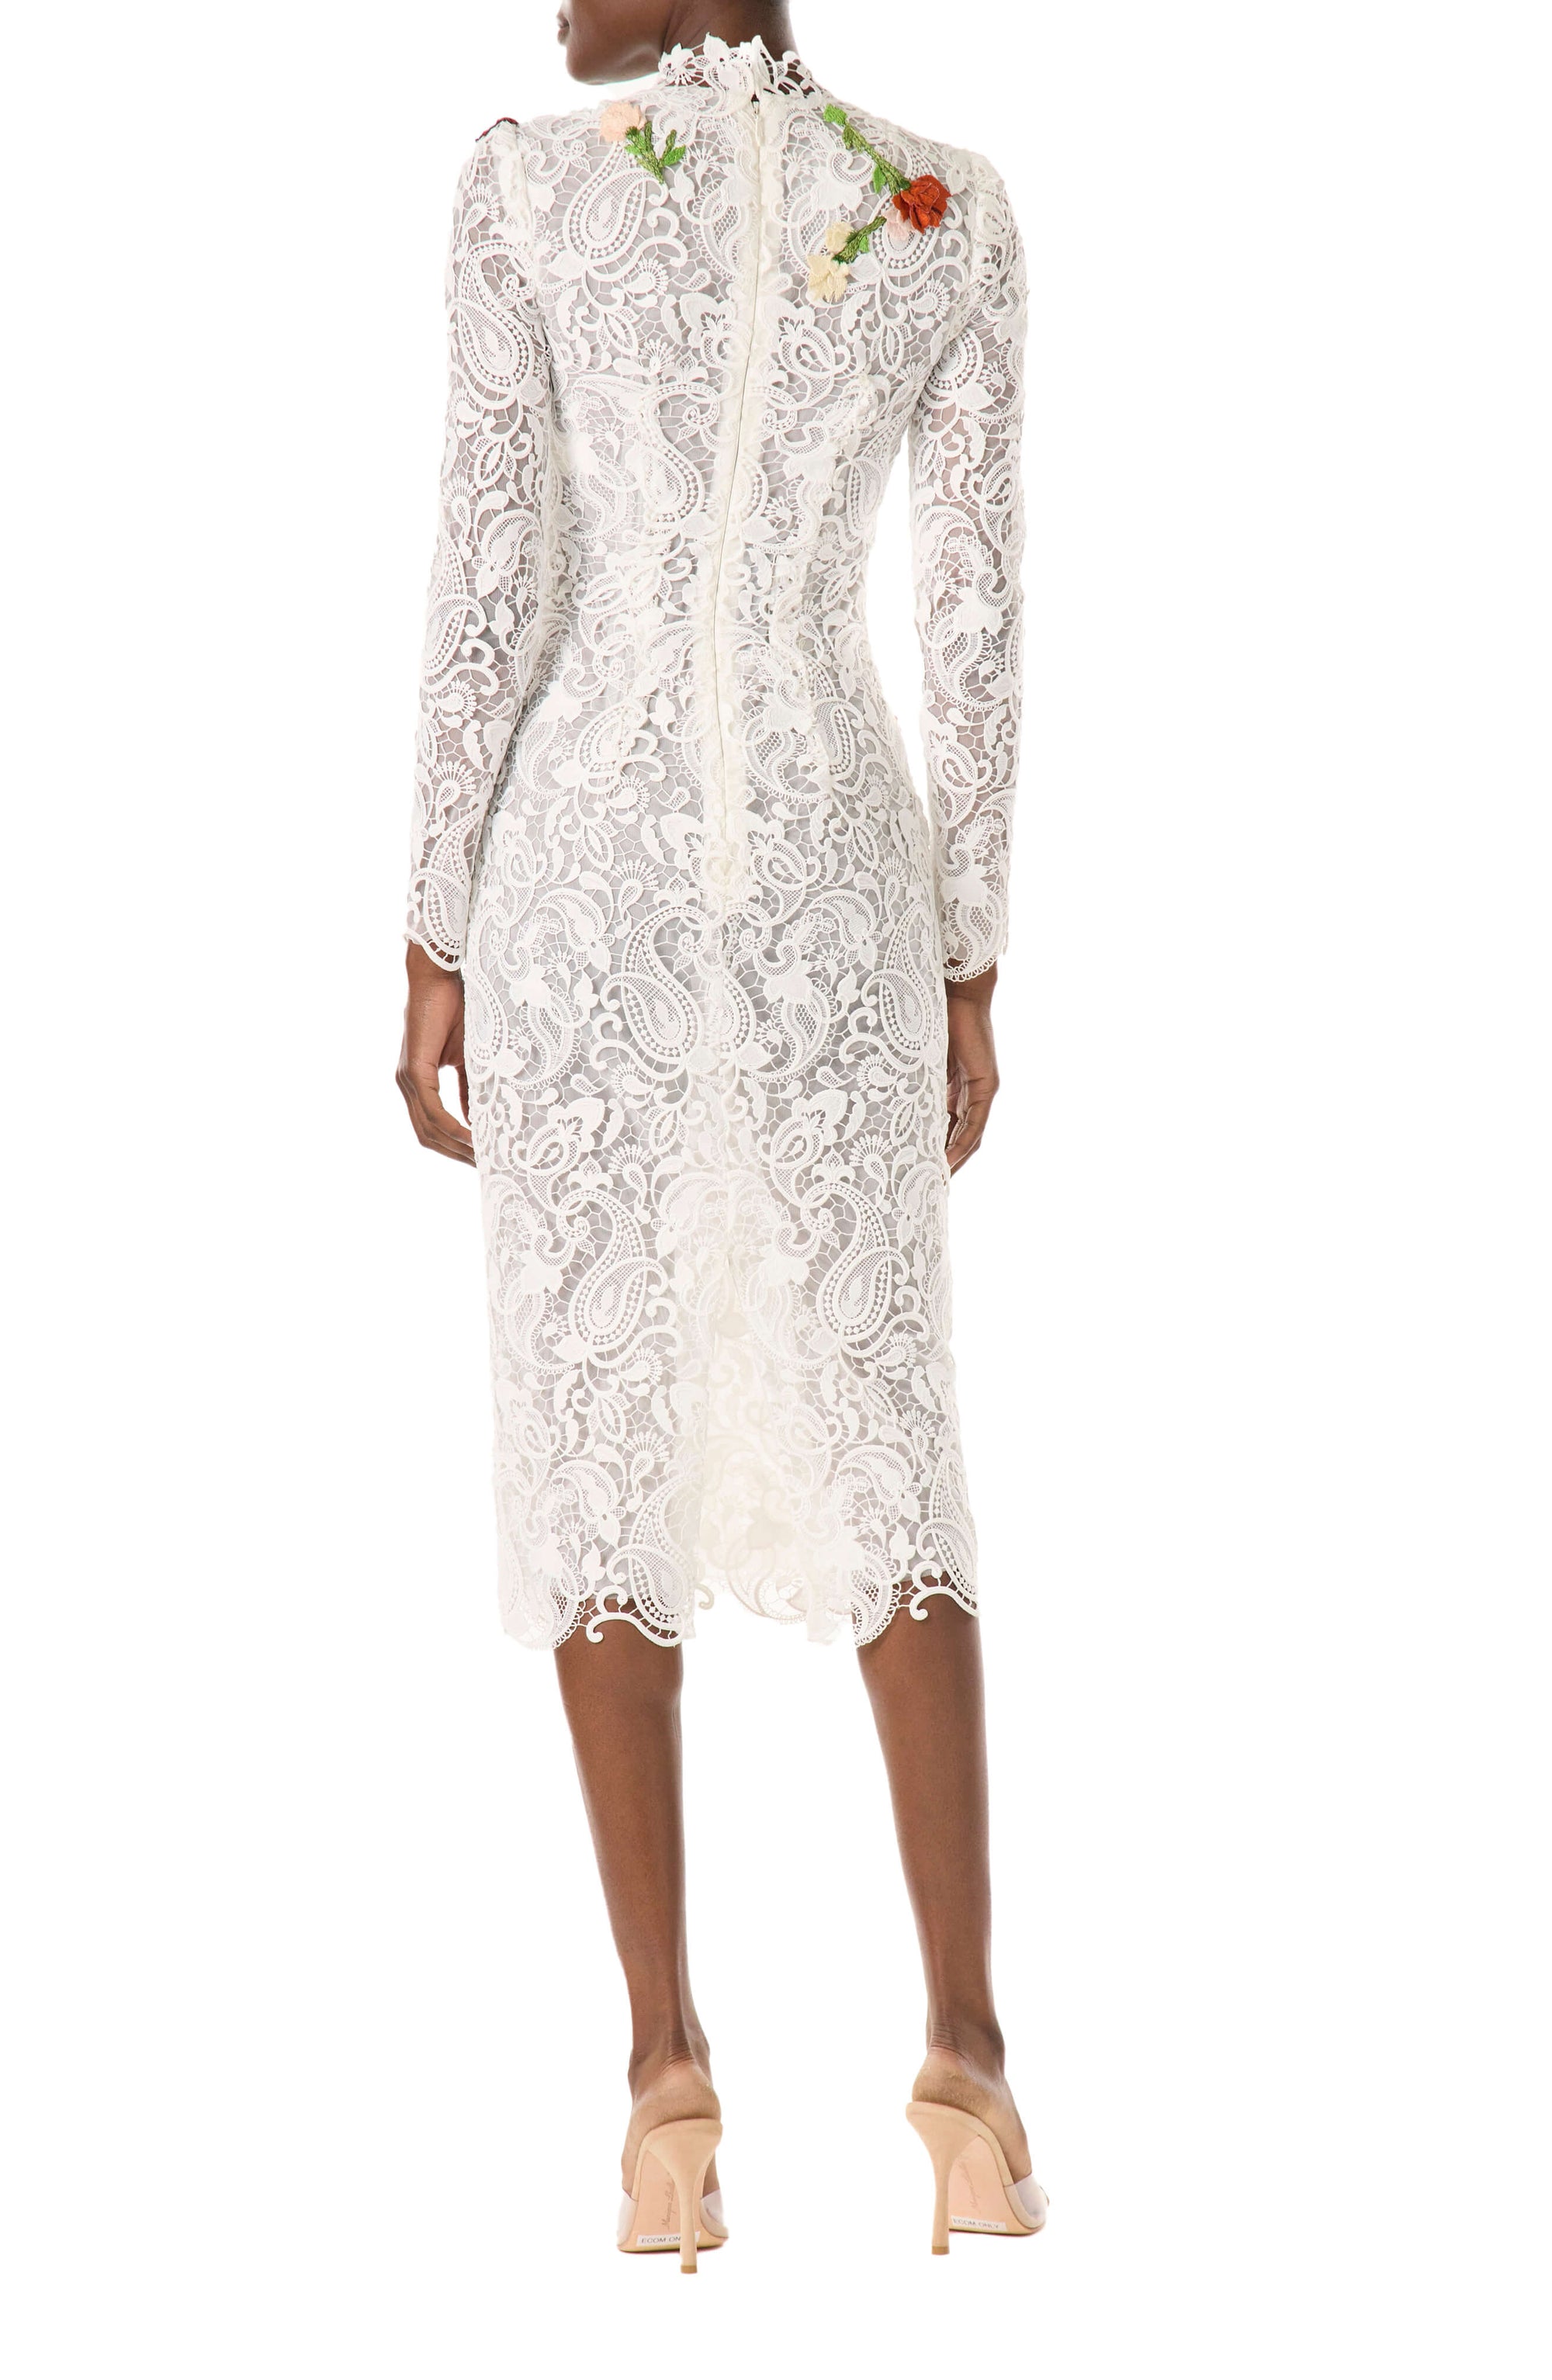 Monique Lhuillier midi length, long sleeve white lace dress with floral embroidery.